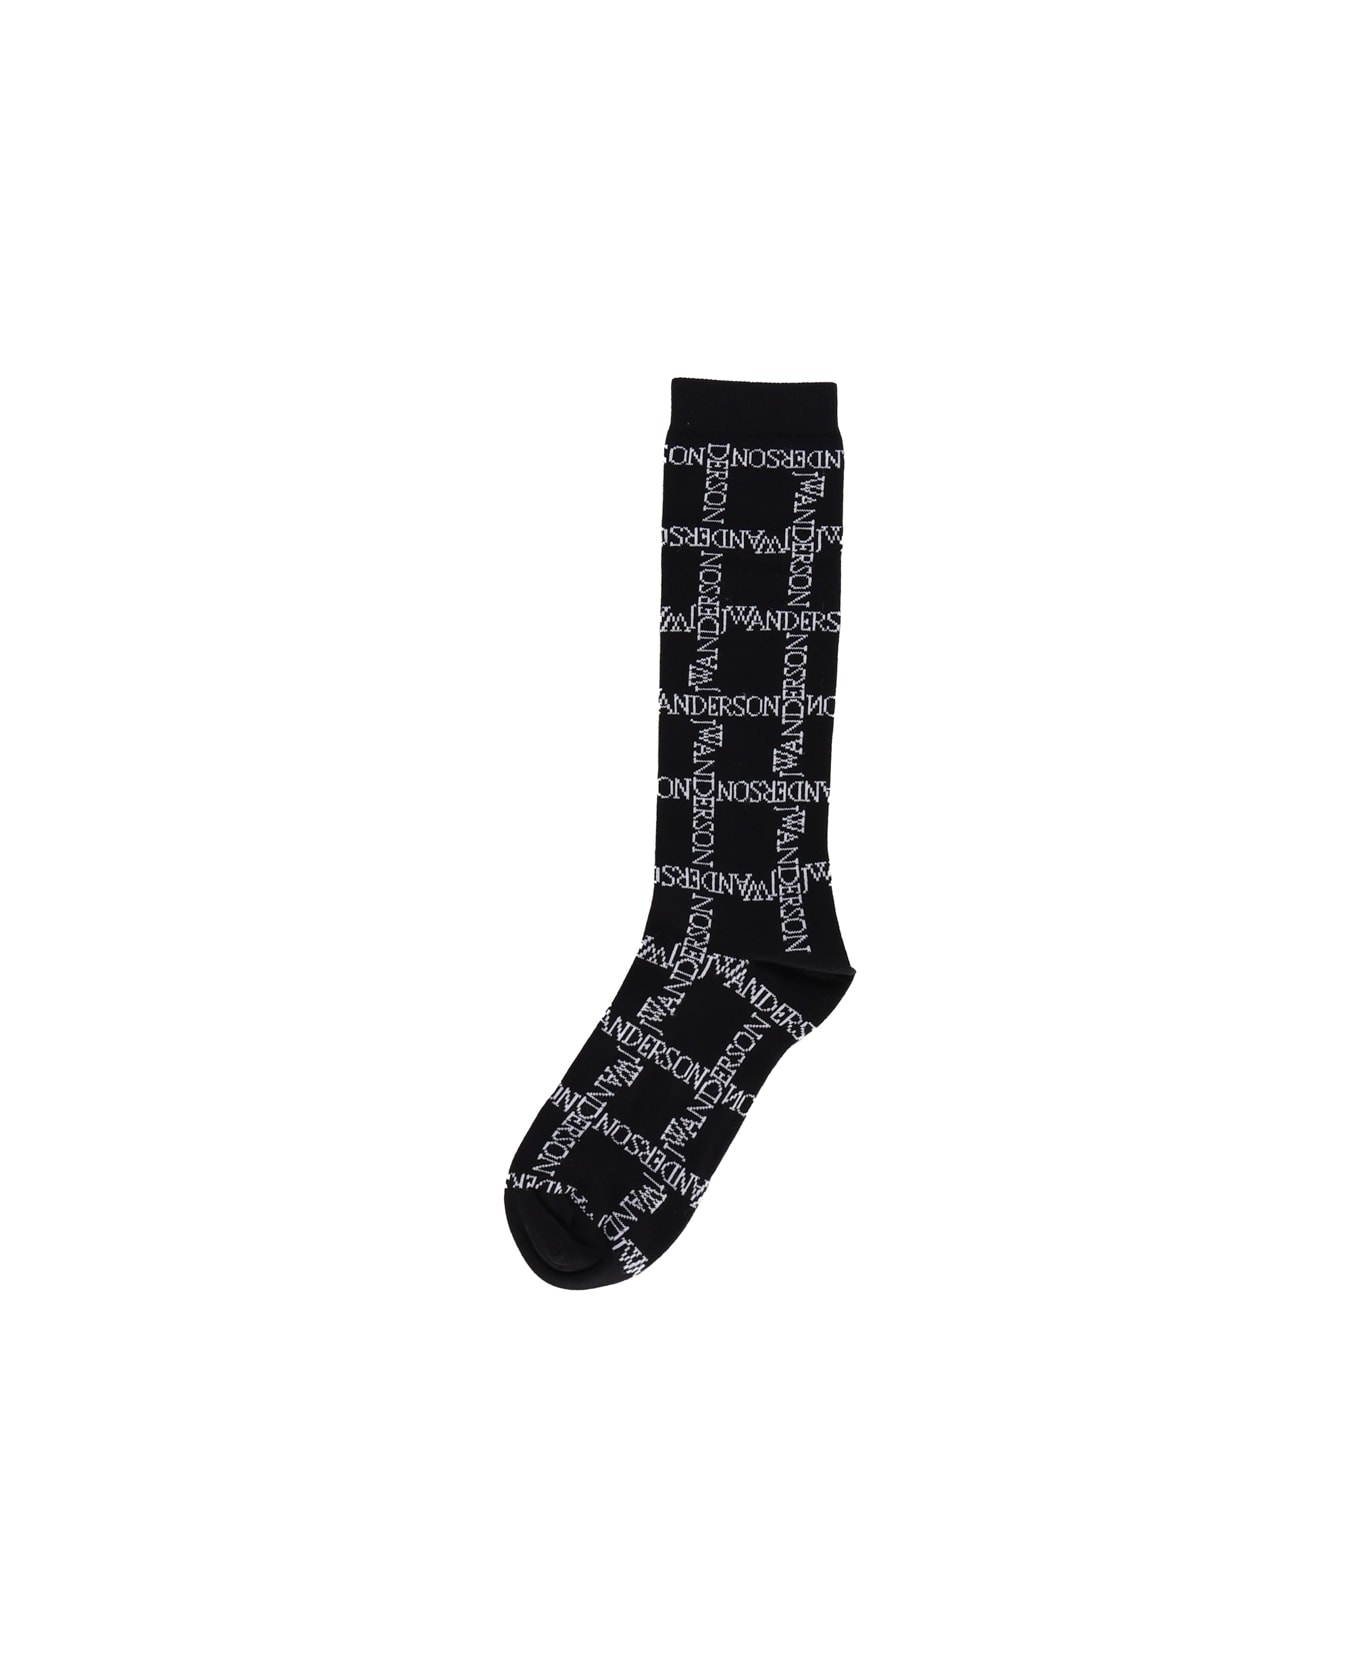 J.W. Anderson Men's Socks With All-over Logo Decoration - Black/white